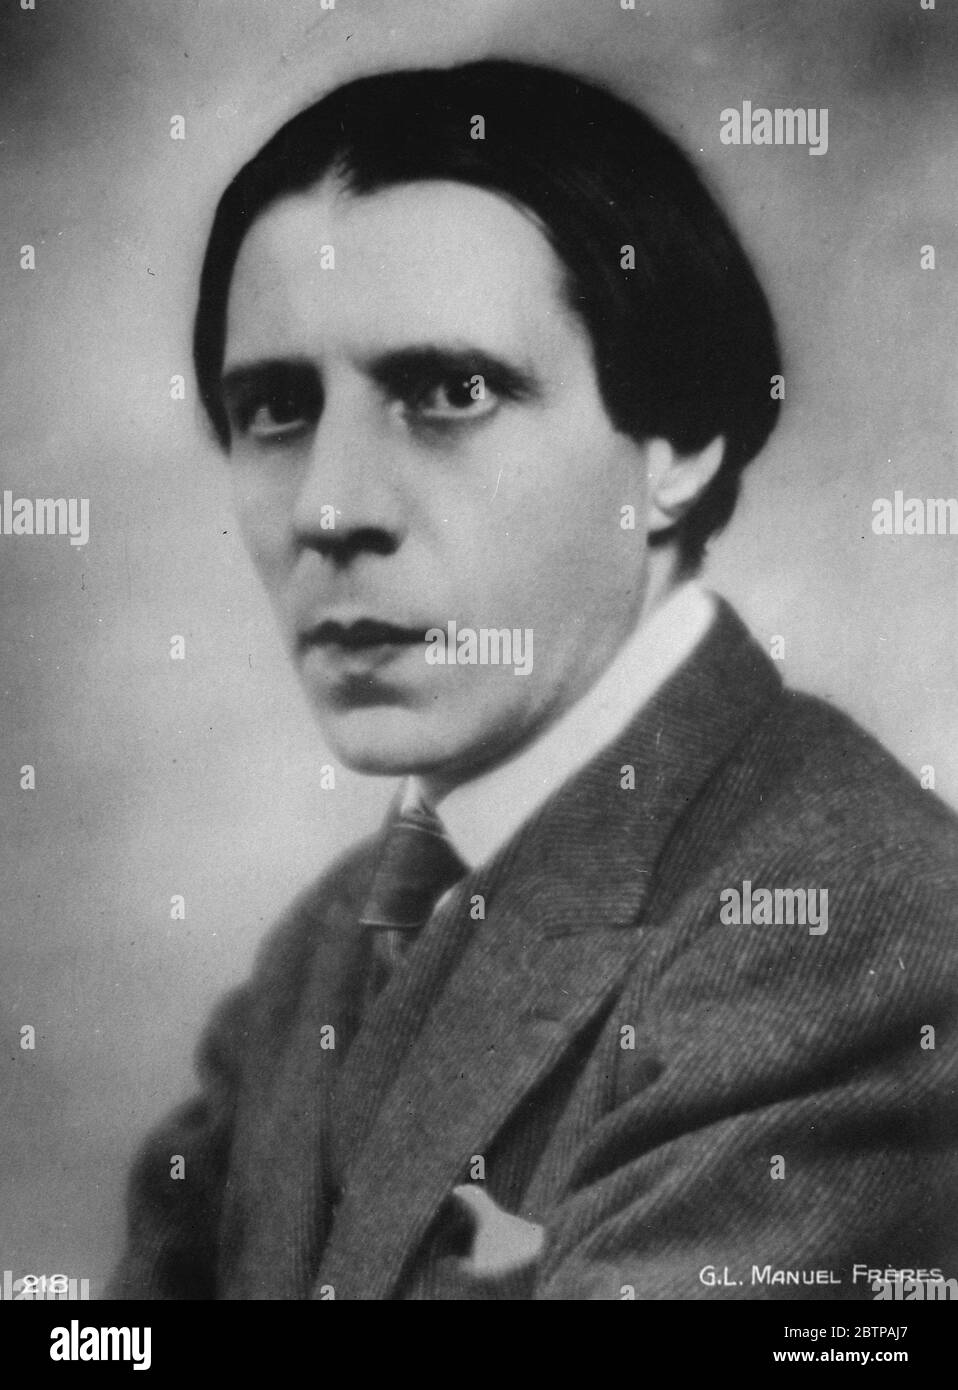 Concert in stable . Cortot the famous pianist who is playing in a Brighton stable to an audience seated on wooden seats . December 1928 Alfred Denis Cortot ( 26 September 1877 - 15 June 1962 ) Franco-Swiss pianist and conductor Stock Photo